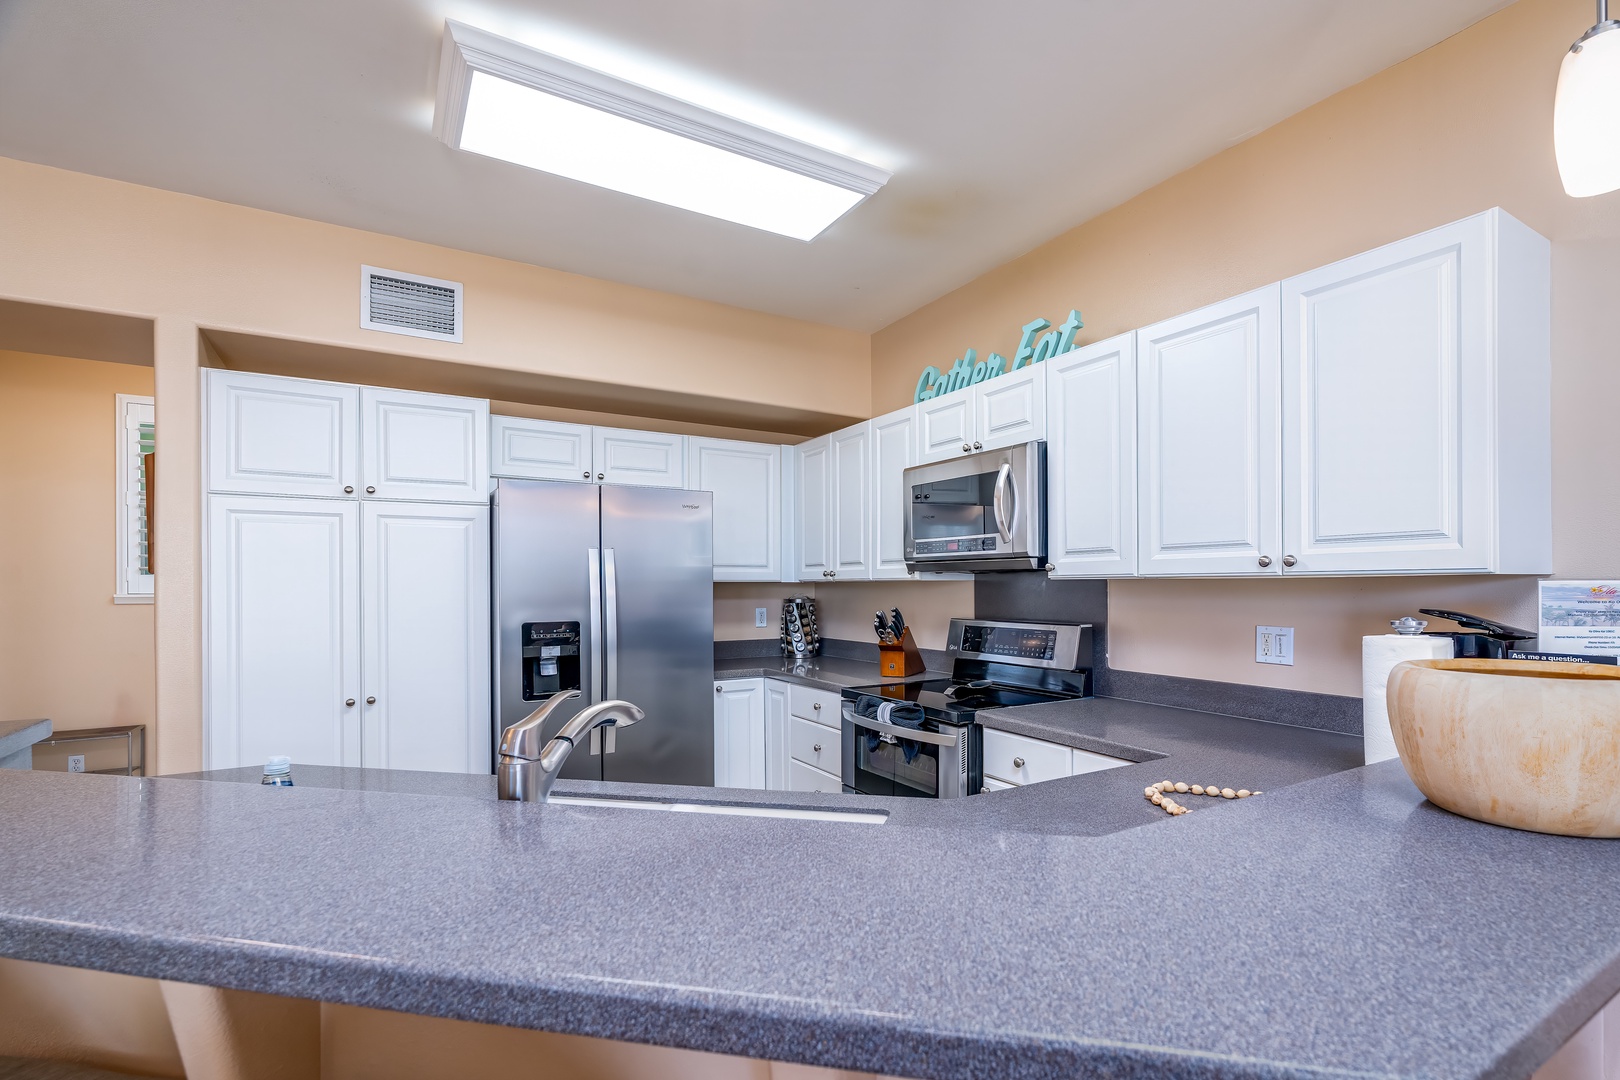 Kapolei Vacation Rentals, Ko Olina Kai 1081C - Plenty of counter space for appetizers on game night.